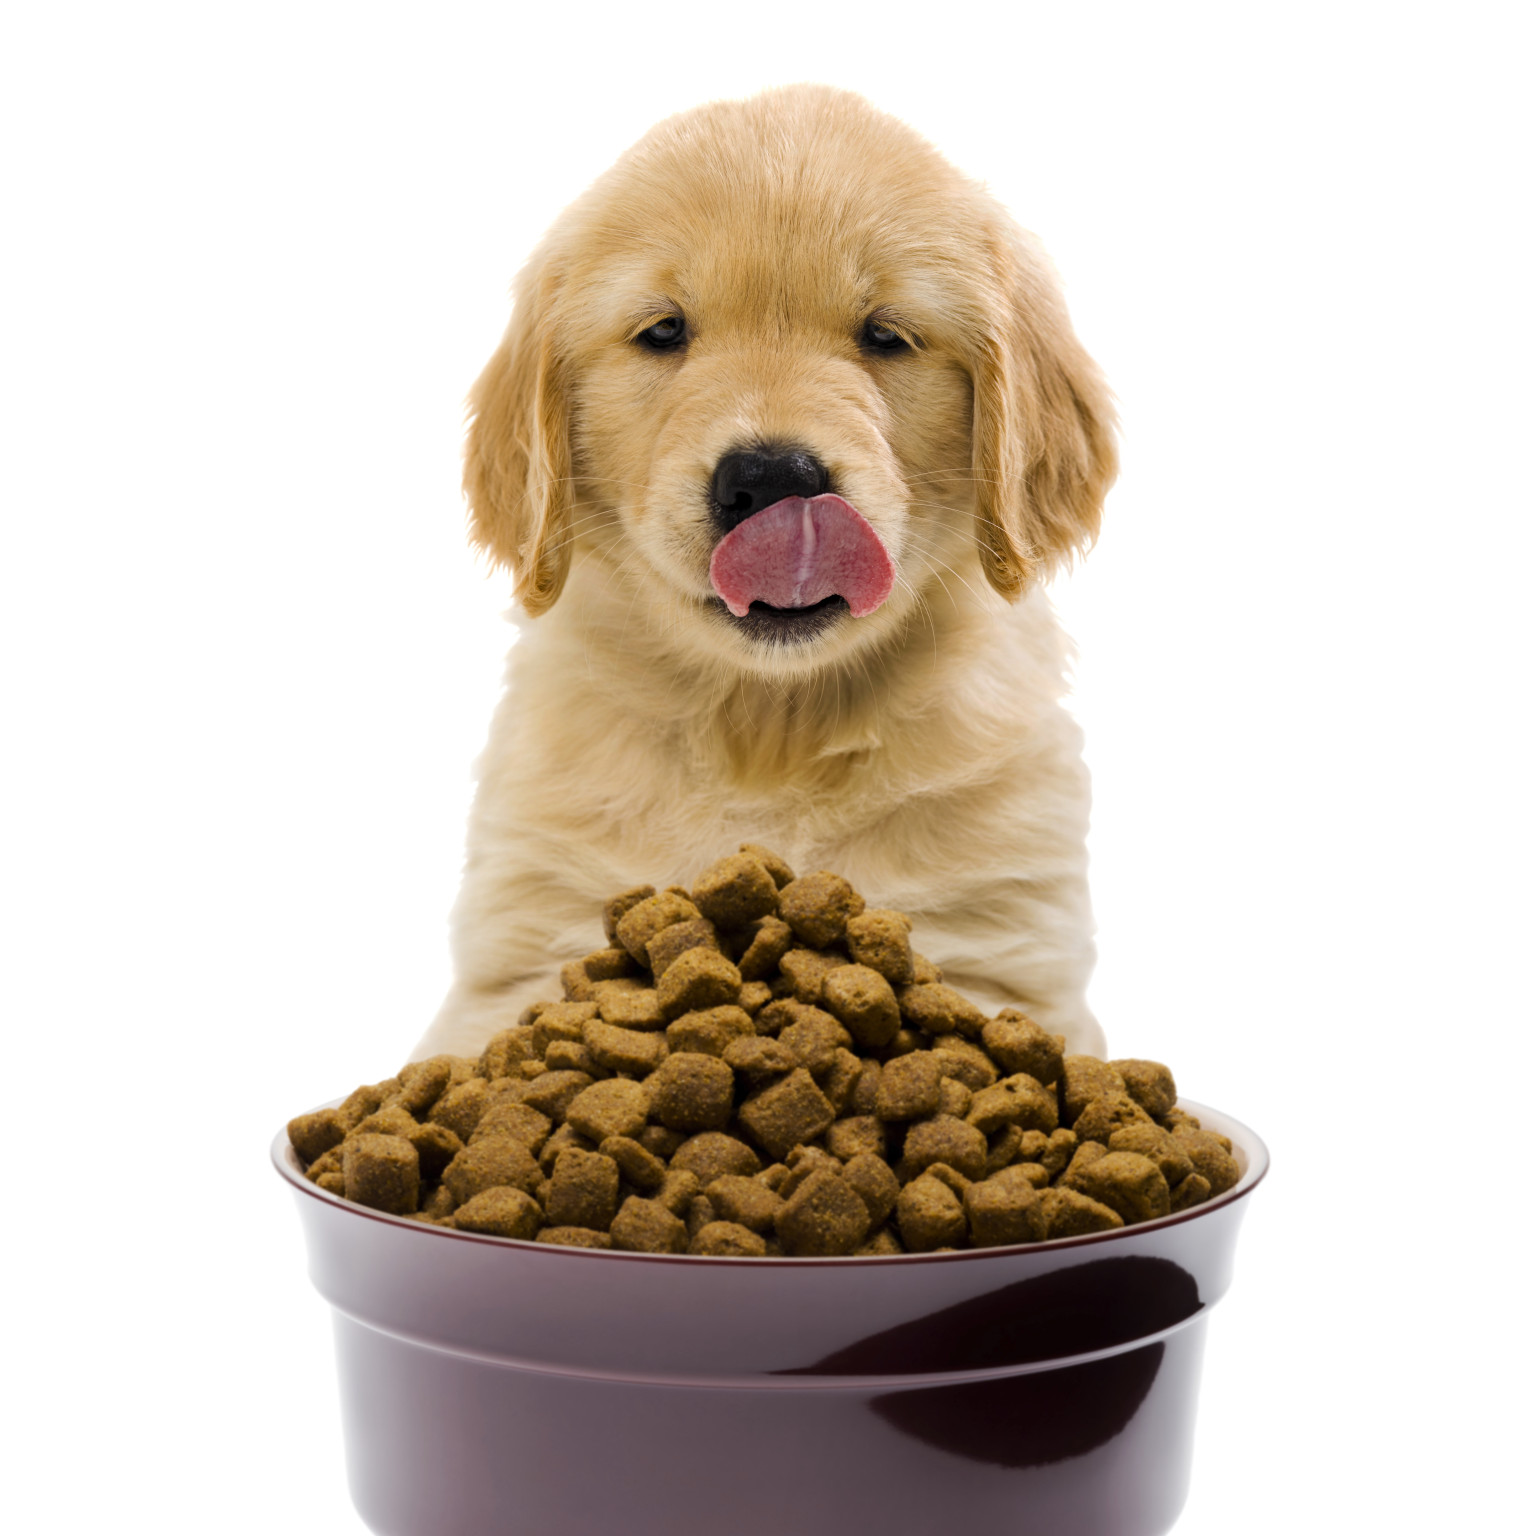 can i feed my puppy cat food